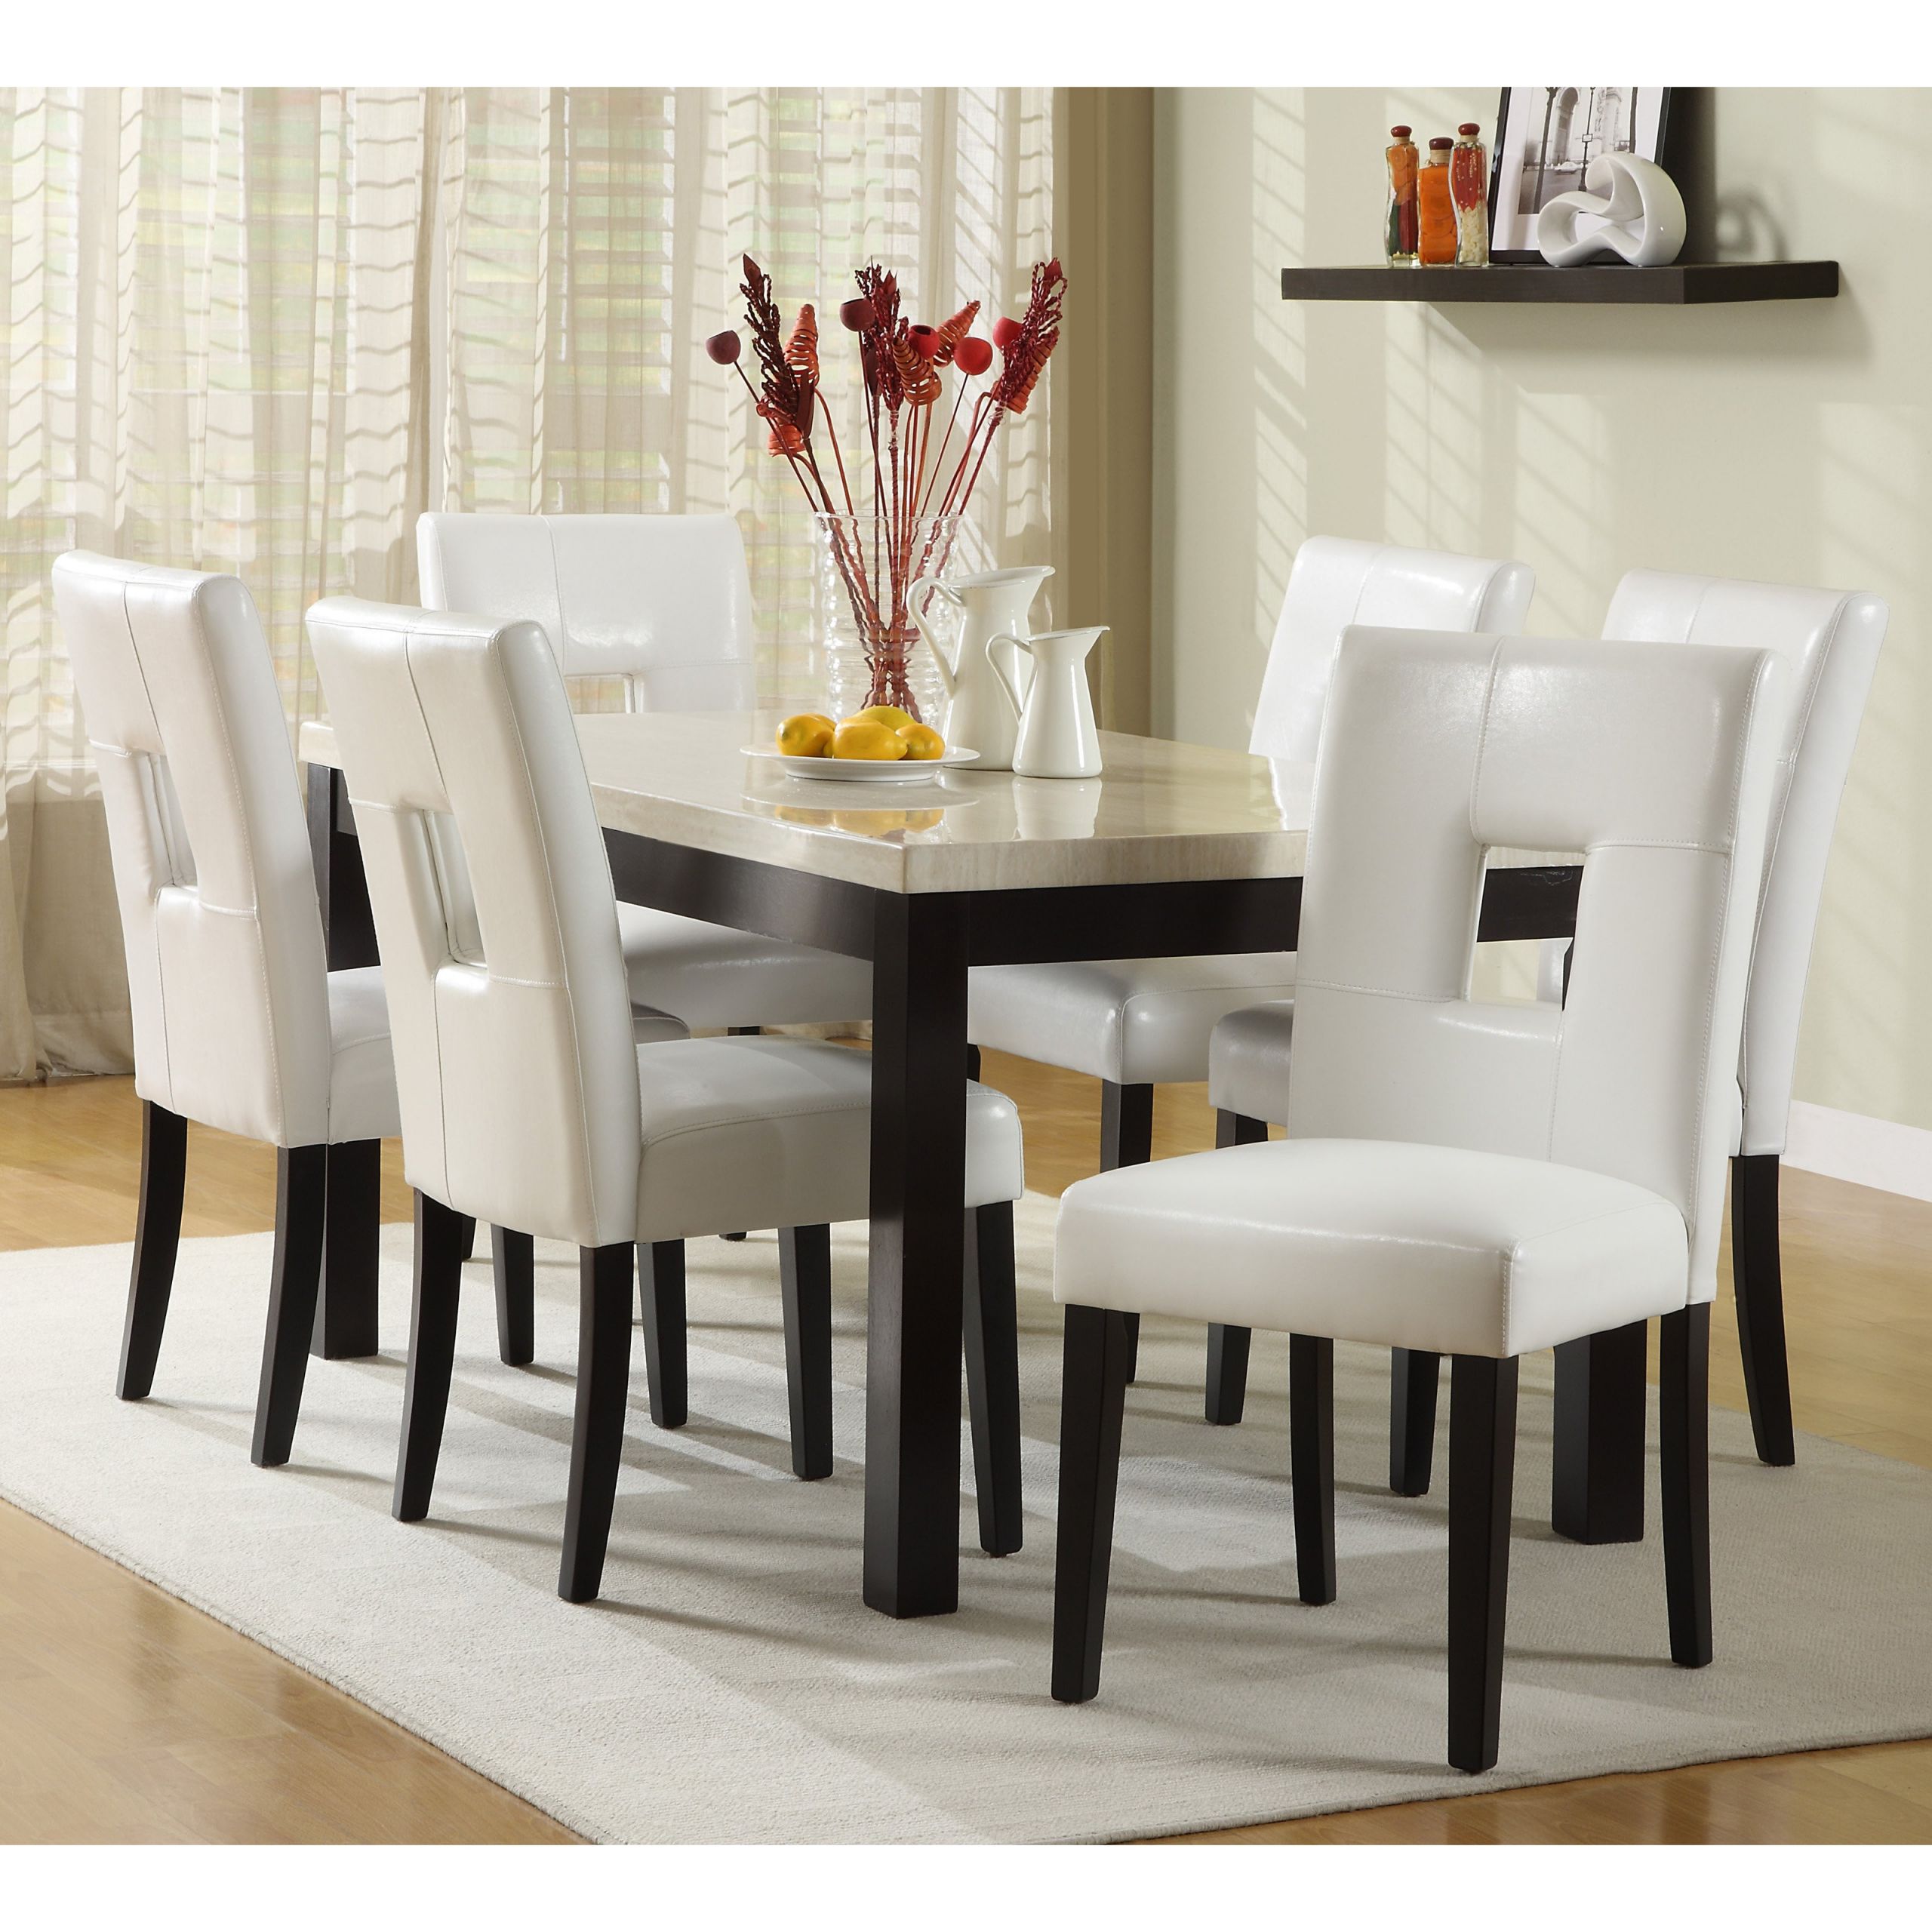 White Kitchen Table Chairs
 Beautiful White Round Kitchen Table and Chairs